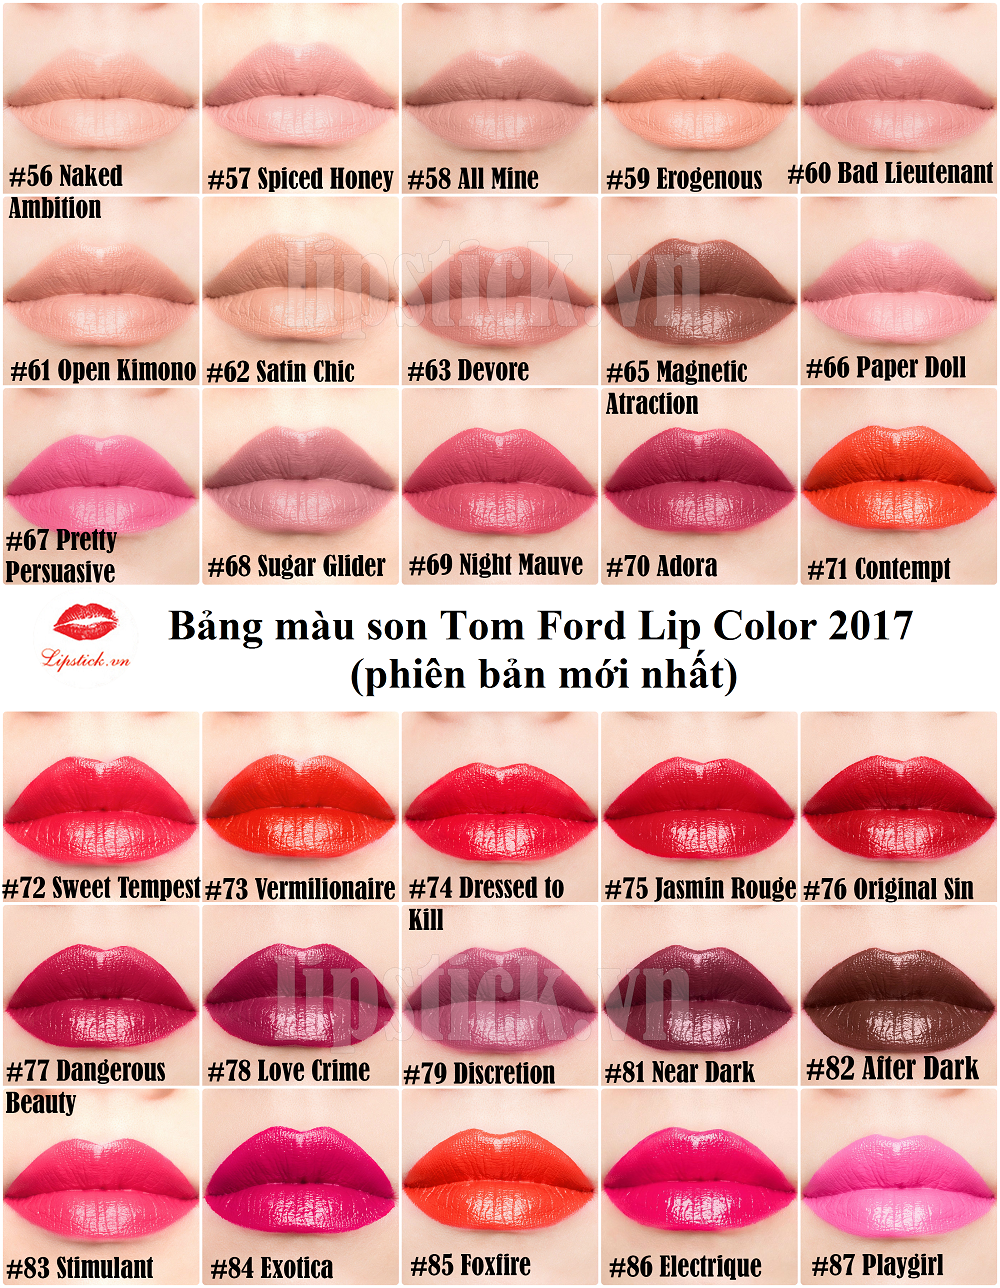 Actualizar 103+ imagen tom ford paper doll - Abzlocal.mx